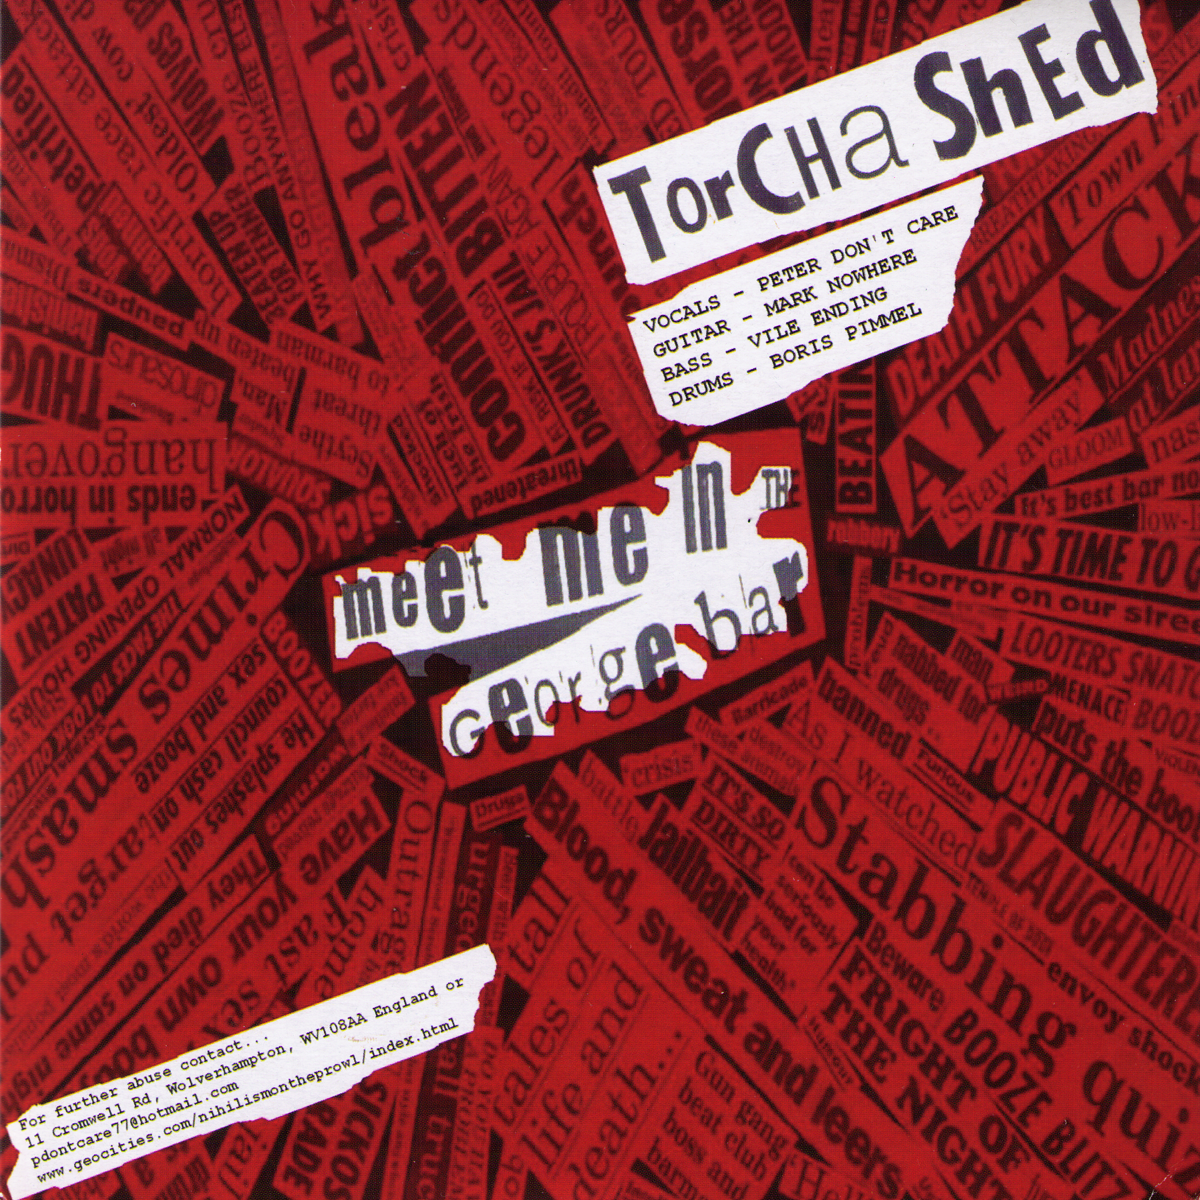 Torcha Shed / Neon Maniacs - Split 7” ~COCK SPARRER!